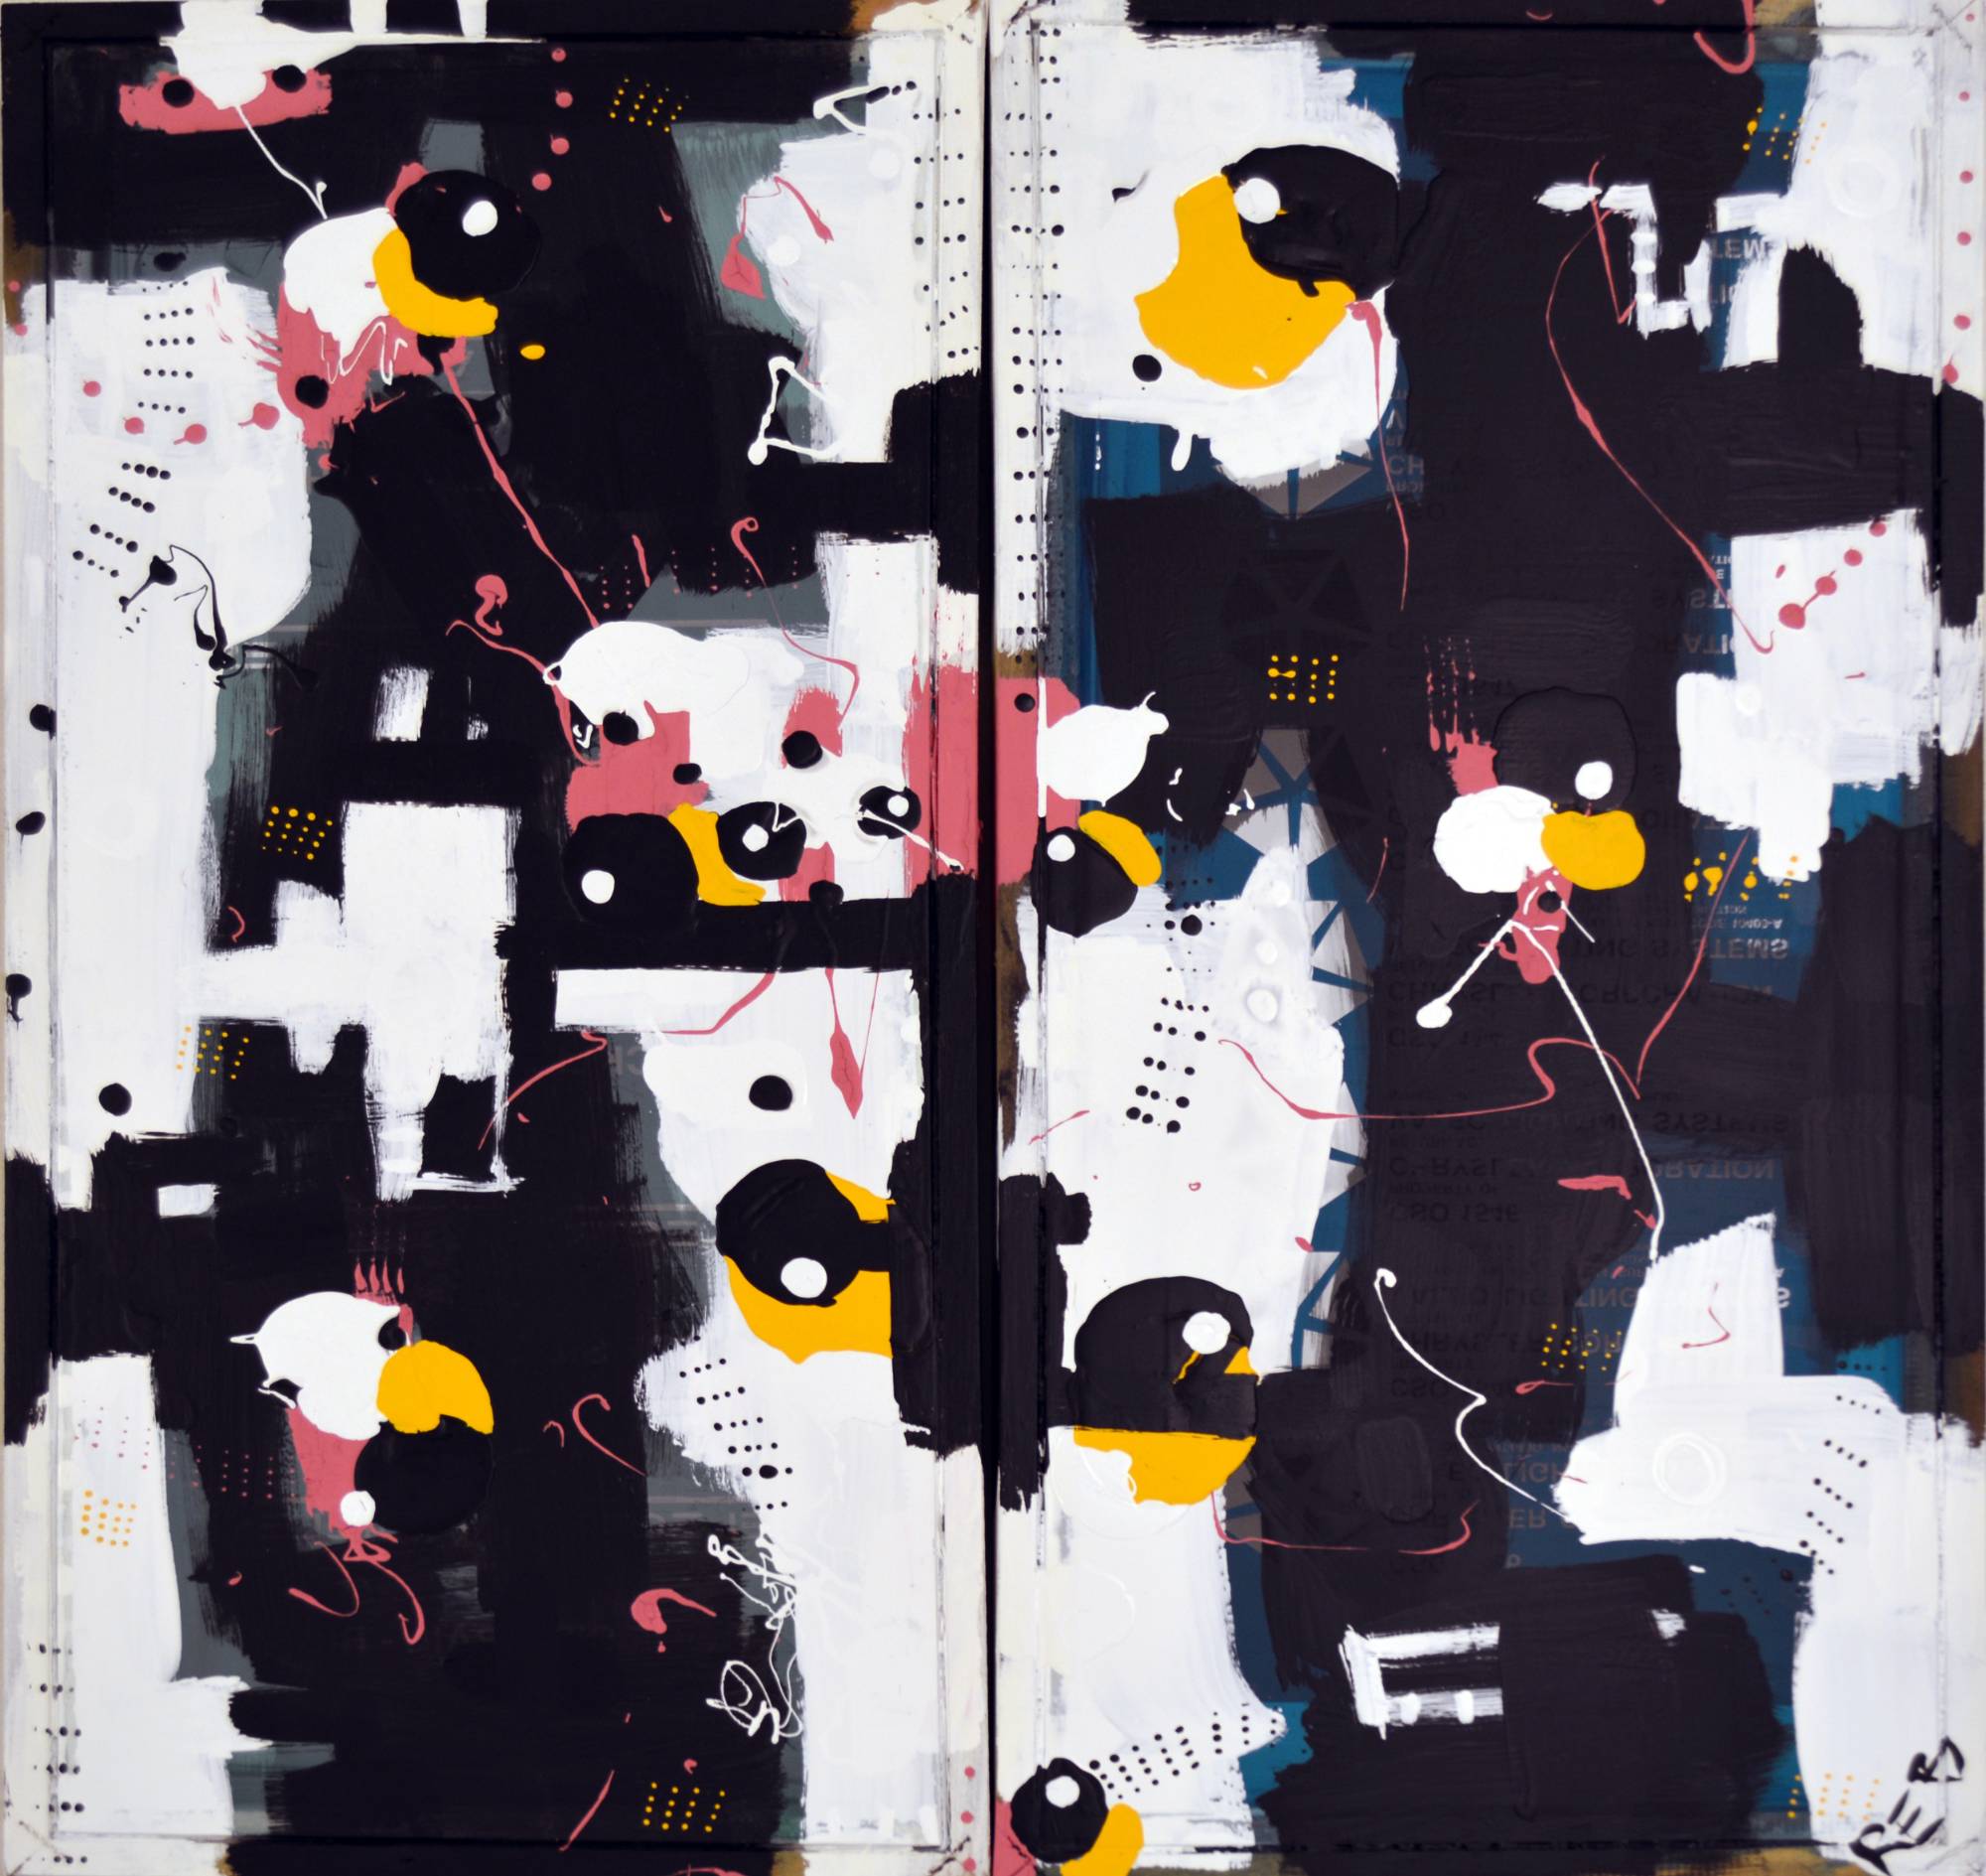 abstract painting in black, white, yellow, and pink